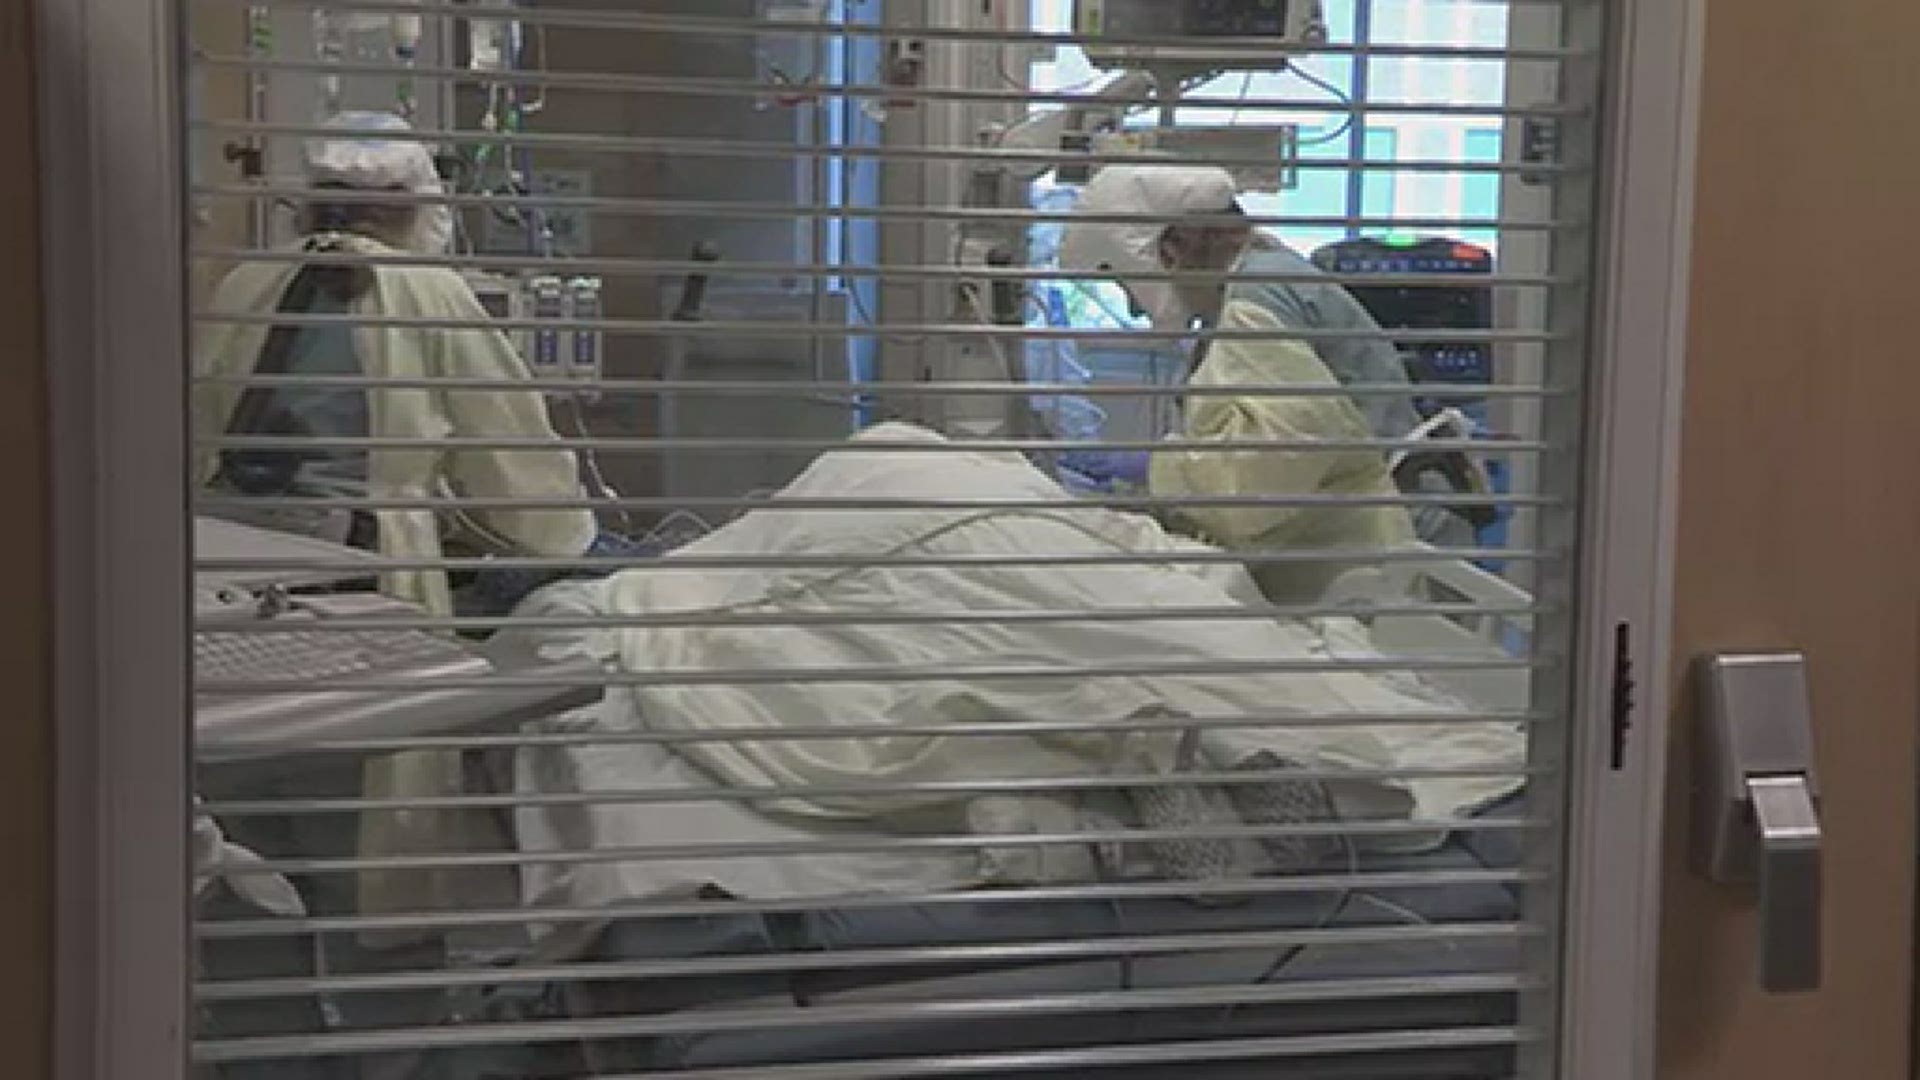 El Paso, Texas is struggling with ICUs amid a surge in coronavirus cases, while Utah's governor is now issuing a mandatory mask order. David Begnaud reports.